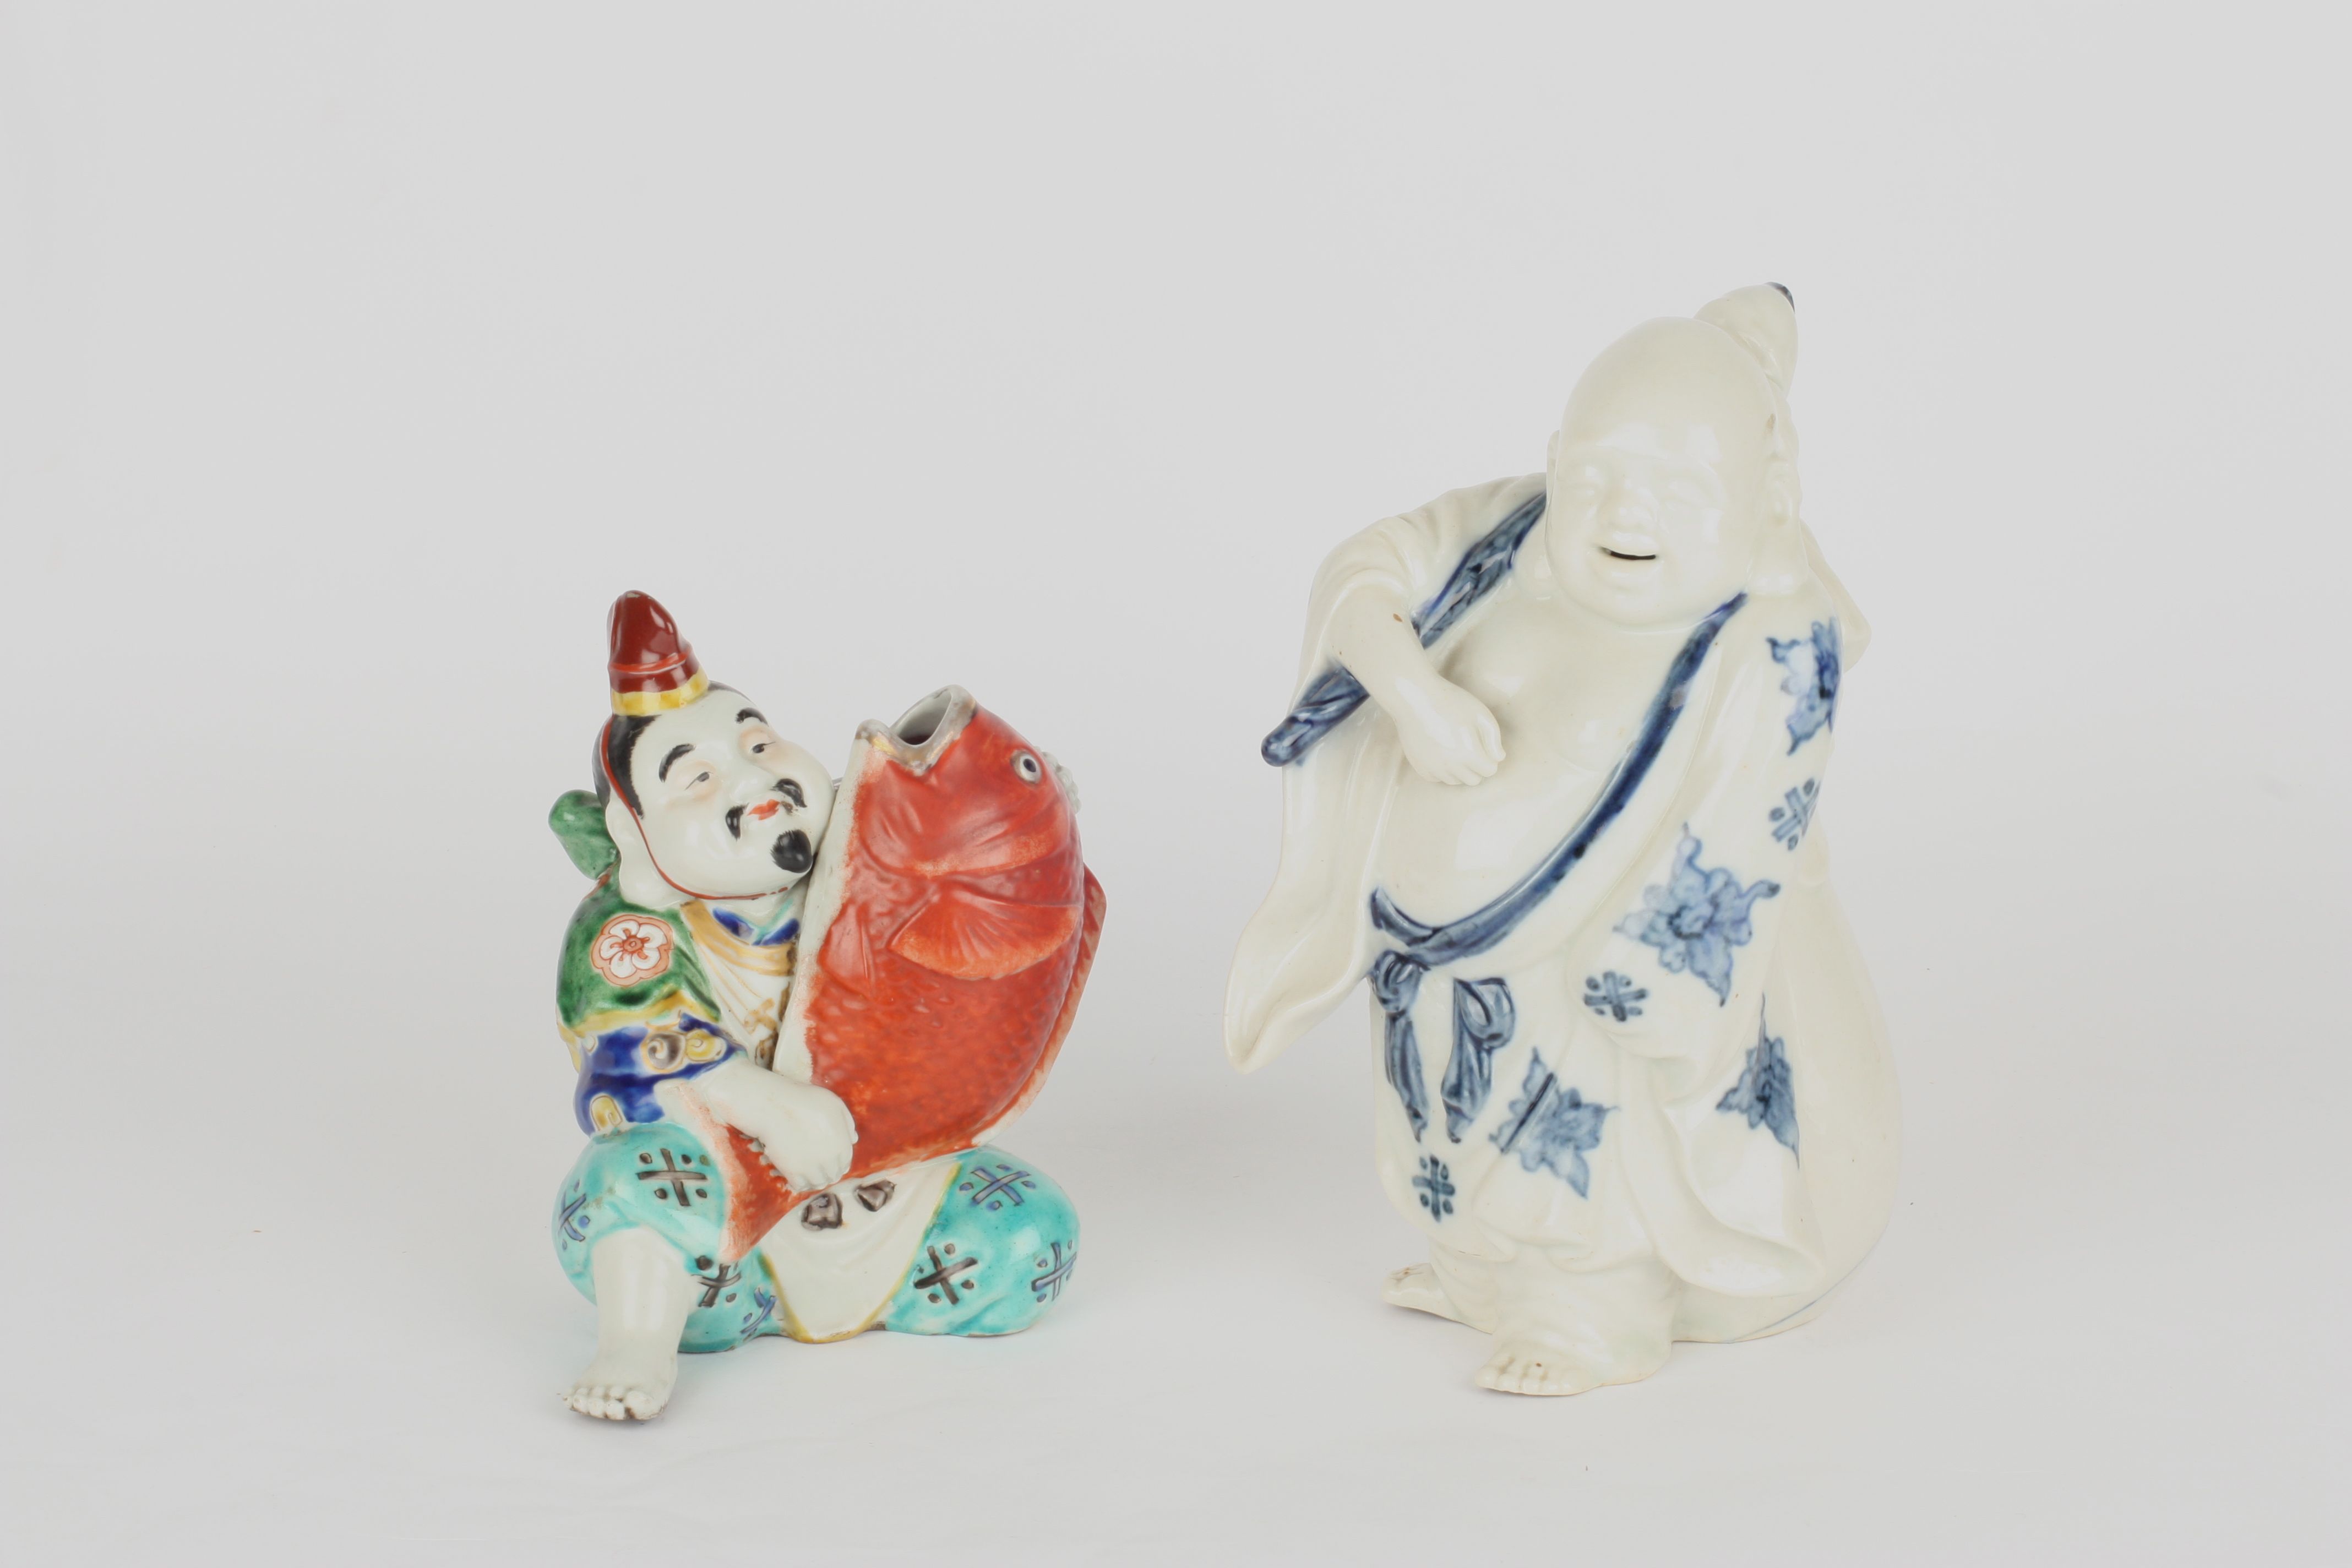 Two 20th century Chinese porcelain figures, one blue and white figure of Buddha in standing pose,